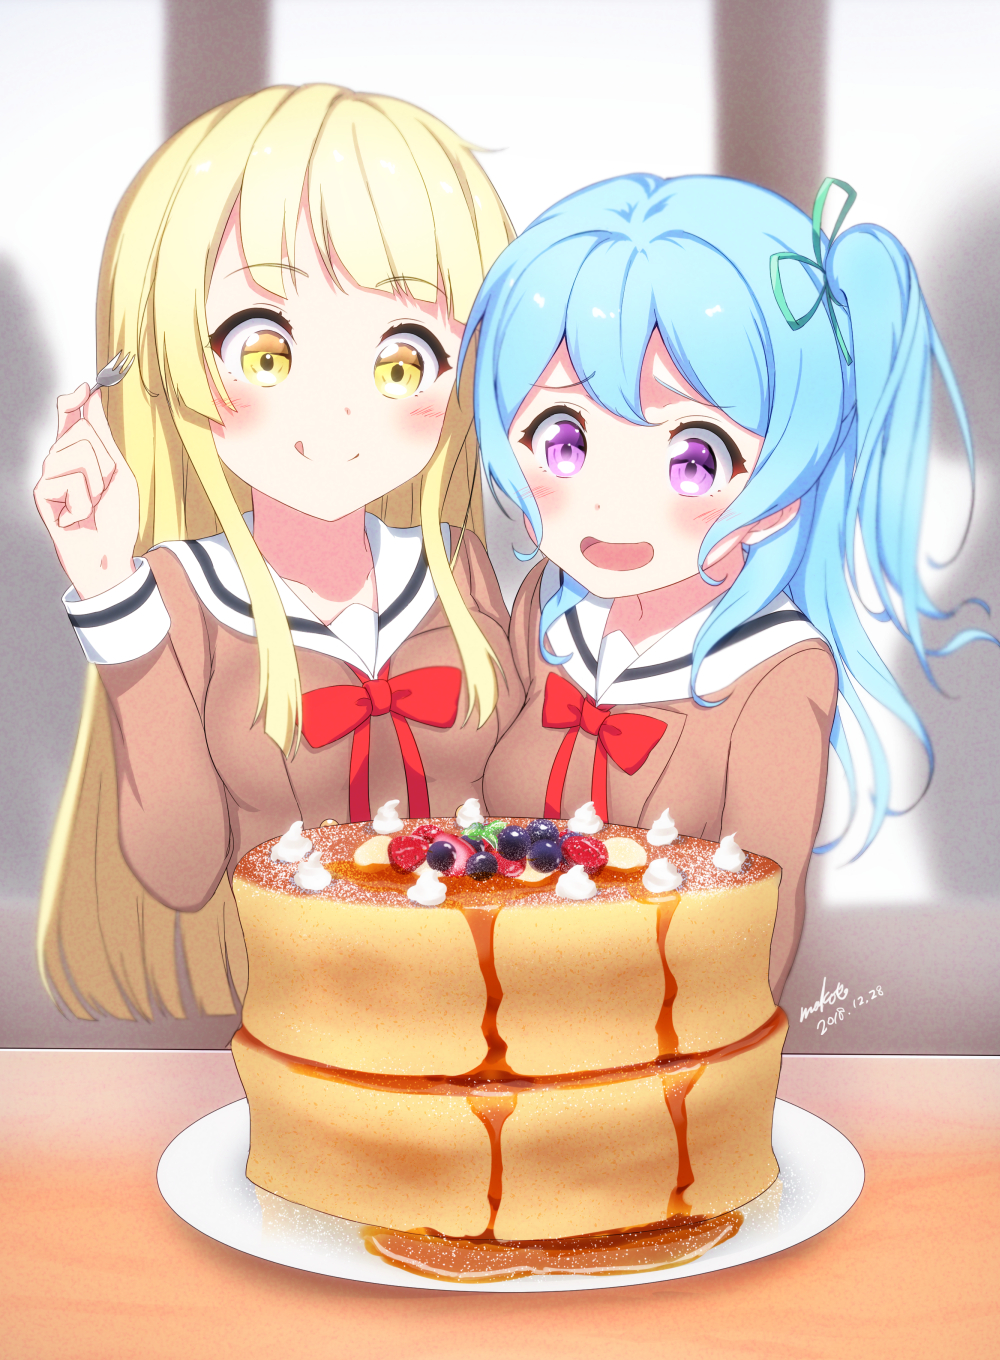 Two pancakes are sufficient. [BanG Dream!] : r/awwnime